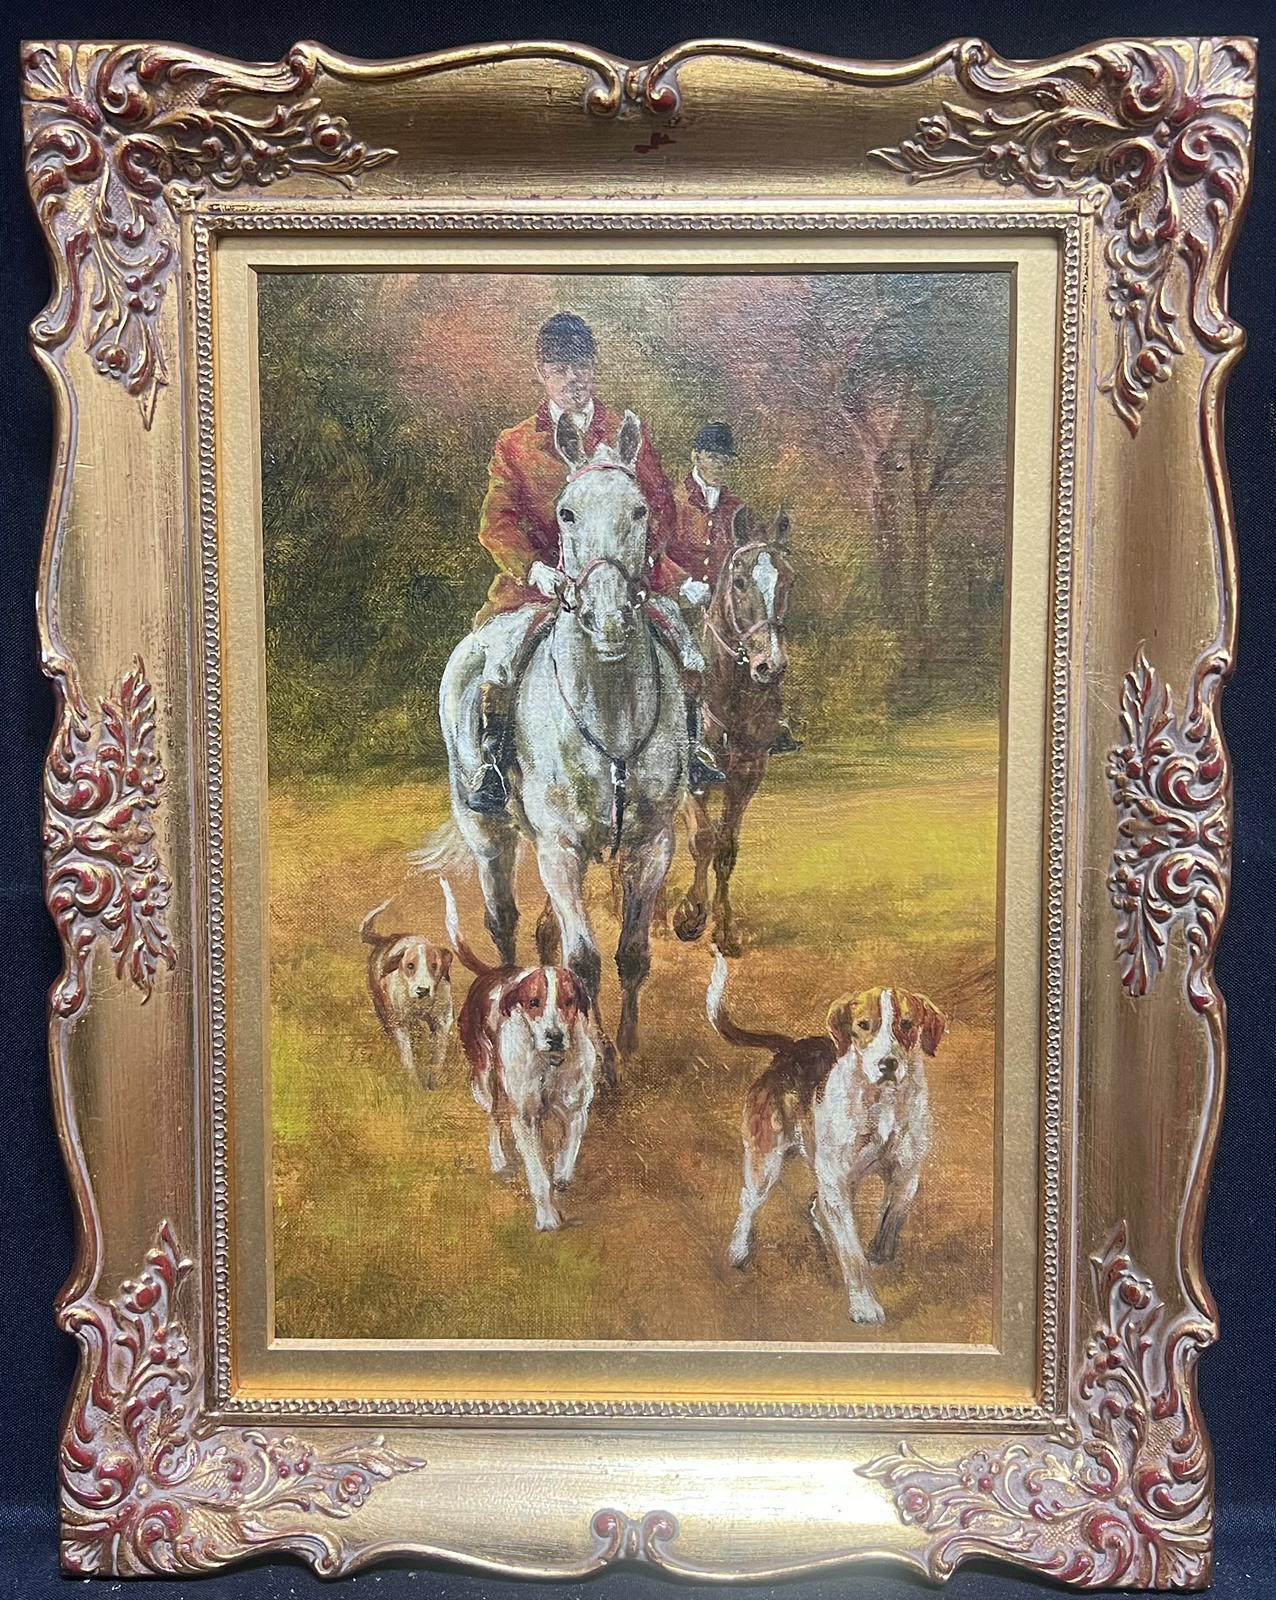 The Huntsman on Horseback with Hounds English Sporting Oil Painting on Canvas